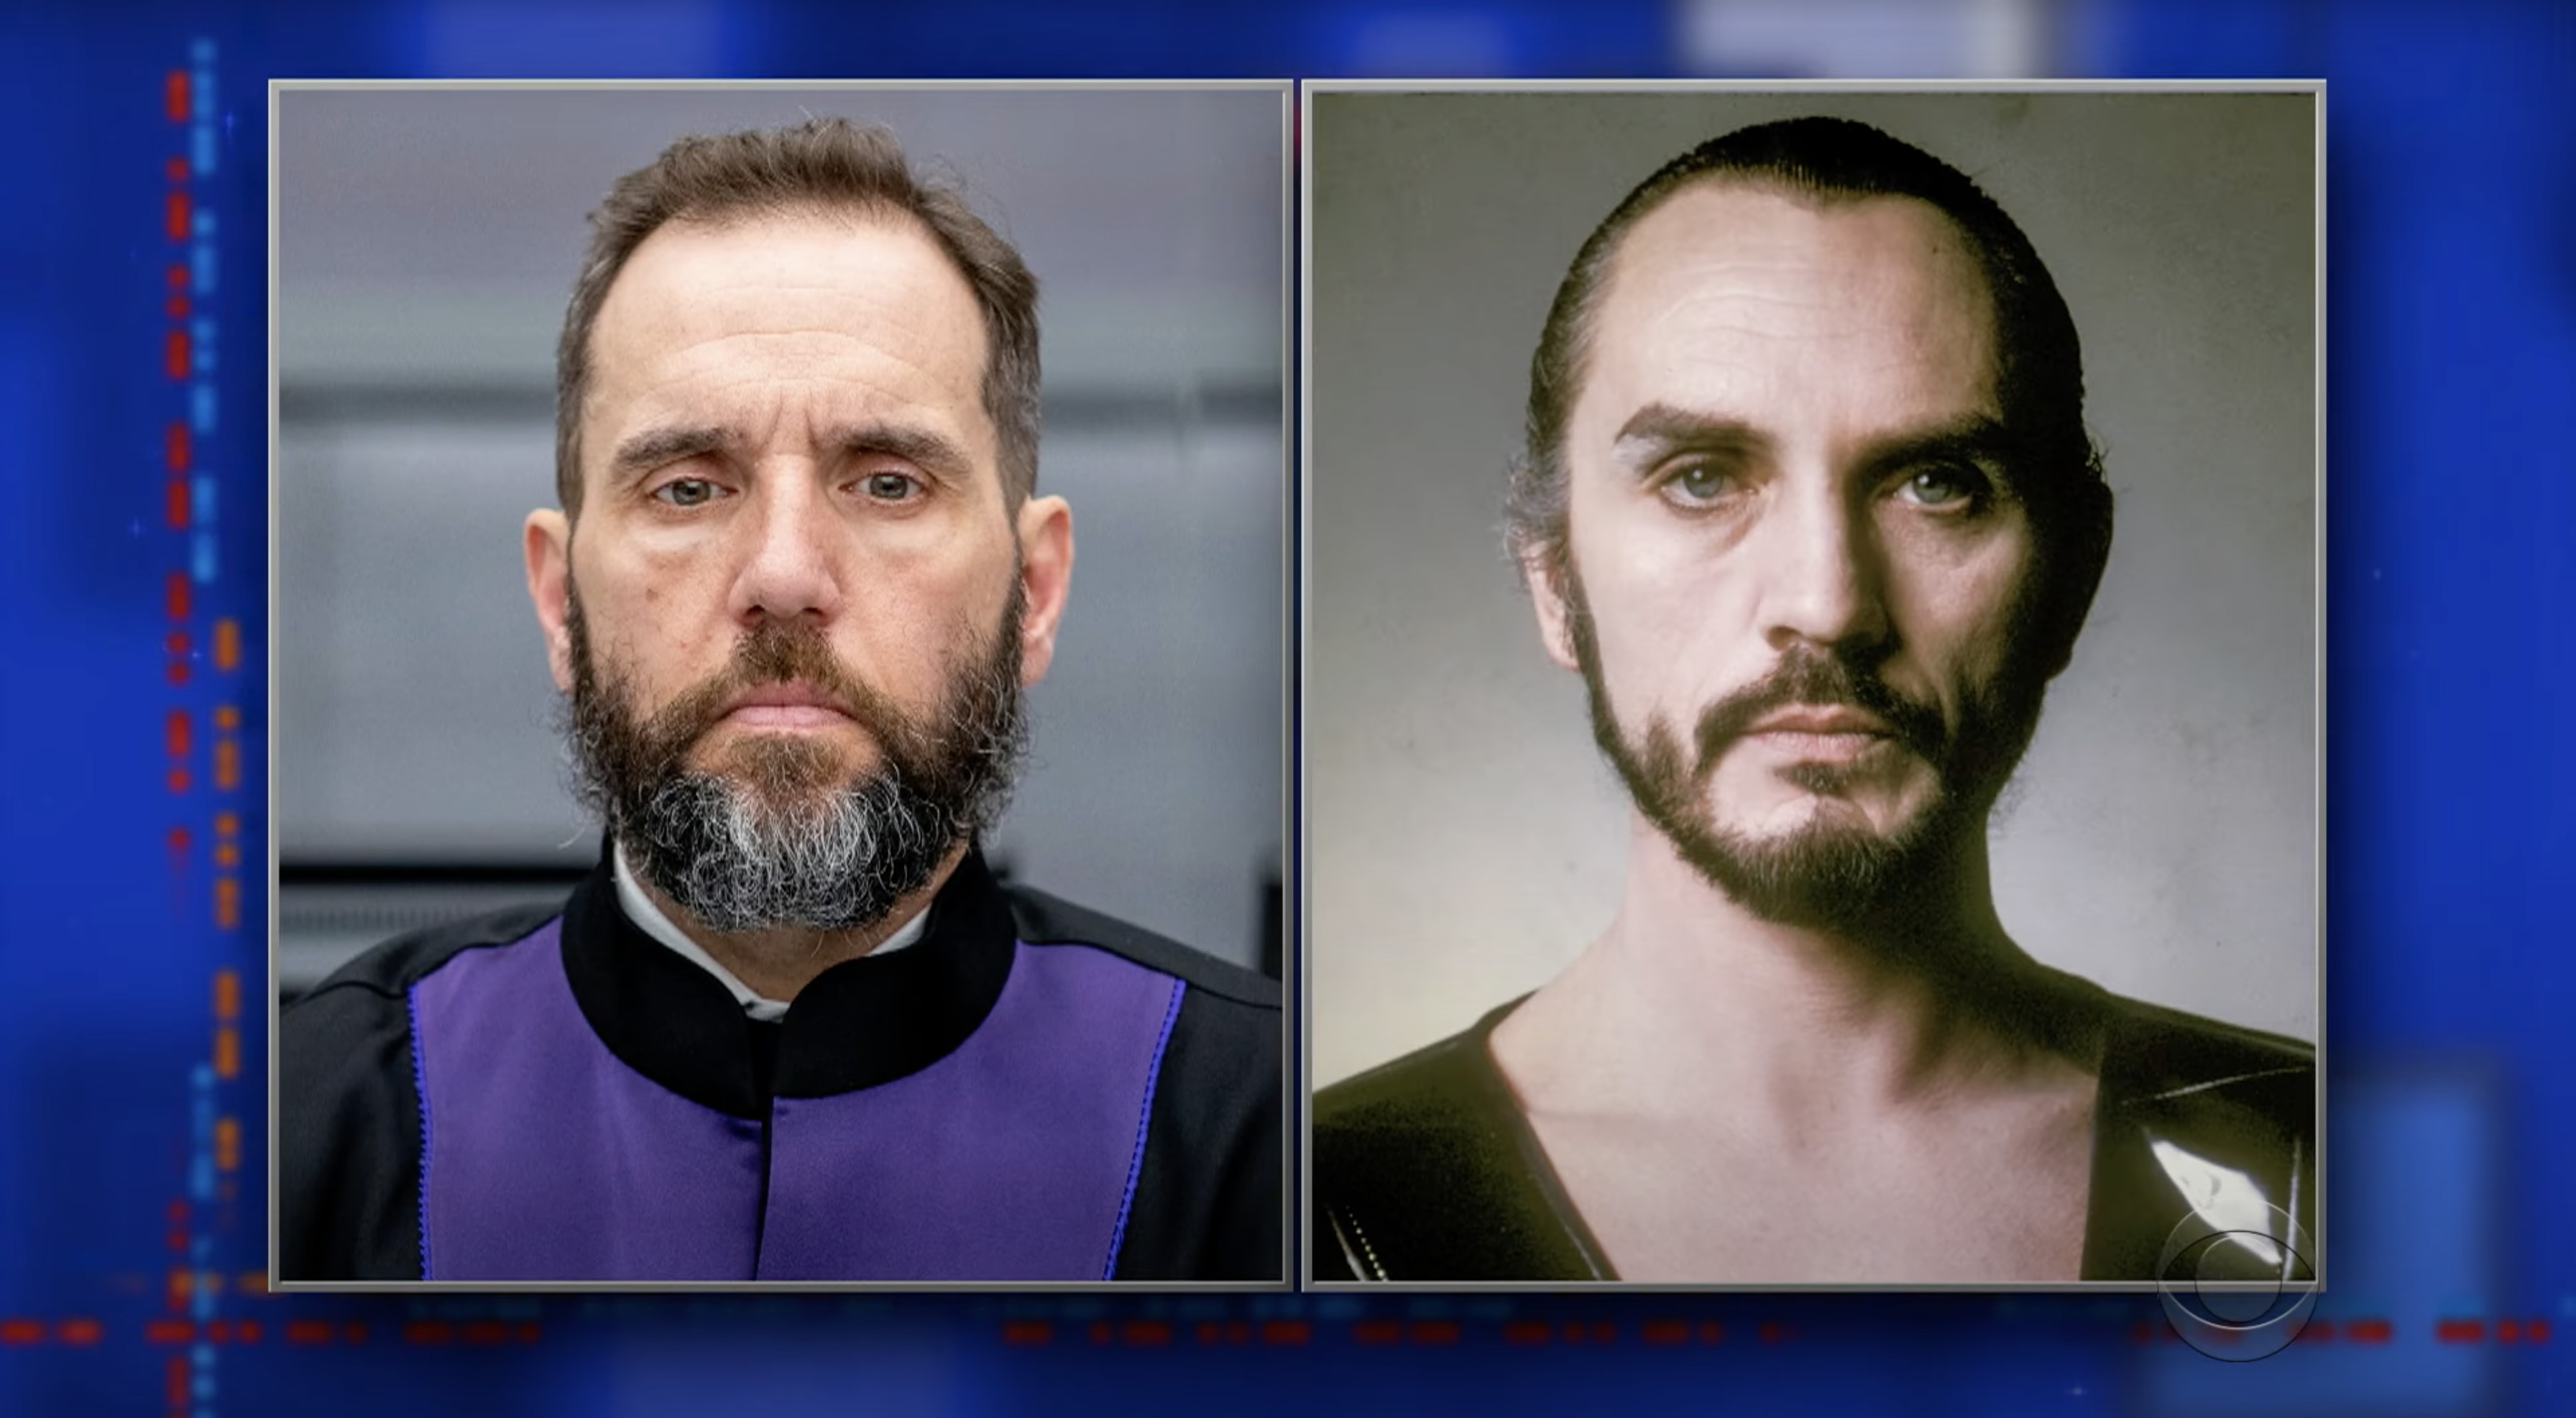 Late night TV jokes about Trump special counsel from CNY: 'General Zod's  cousin' 